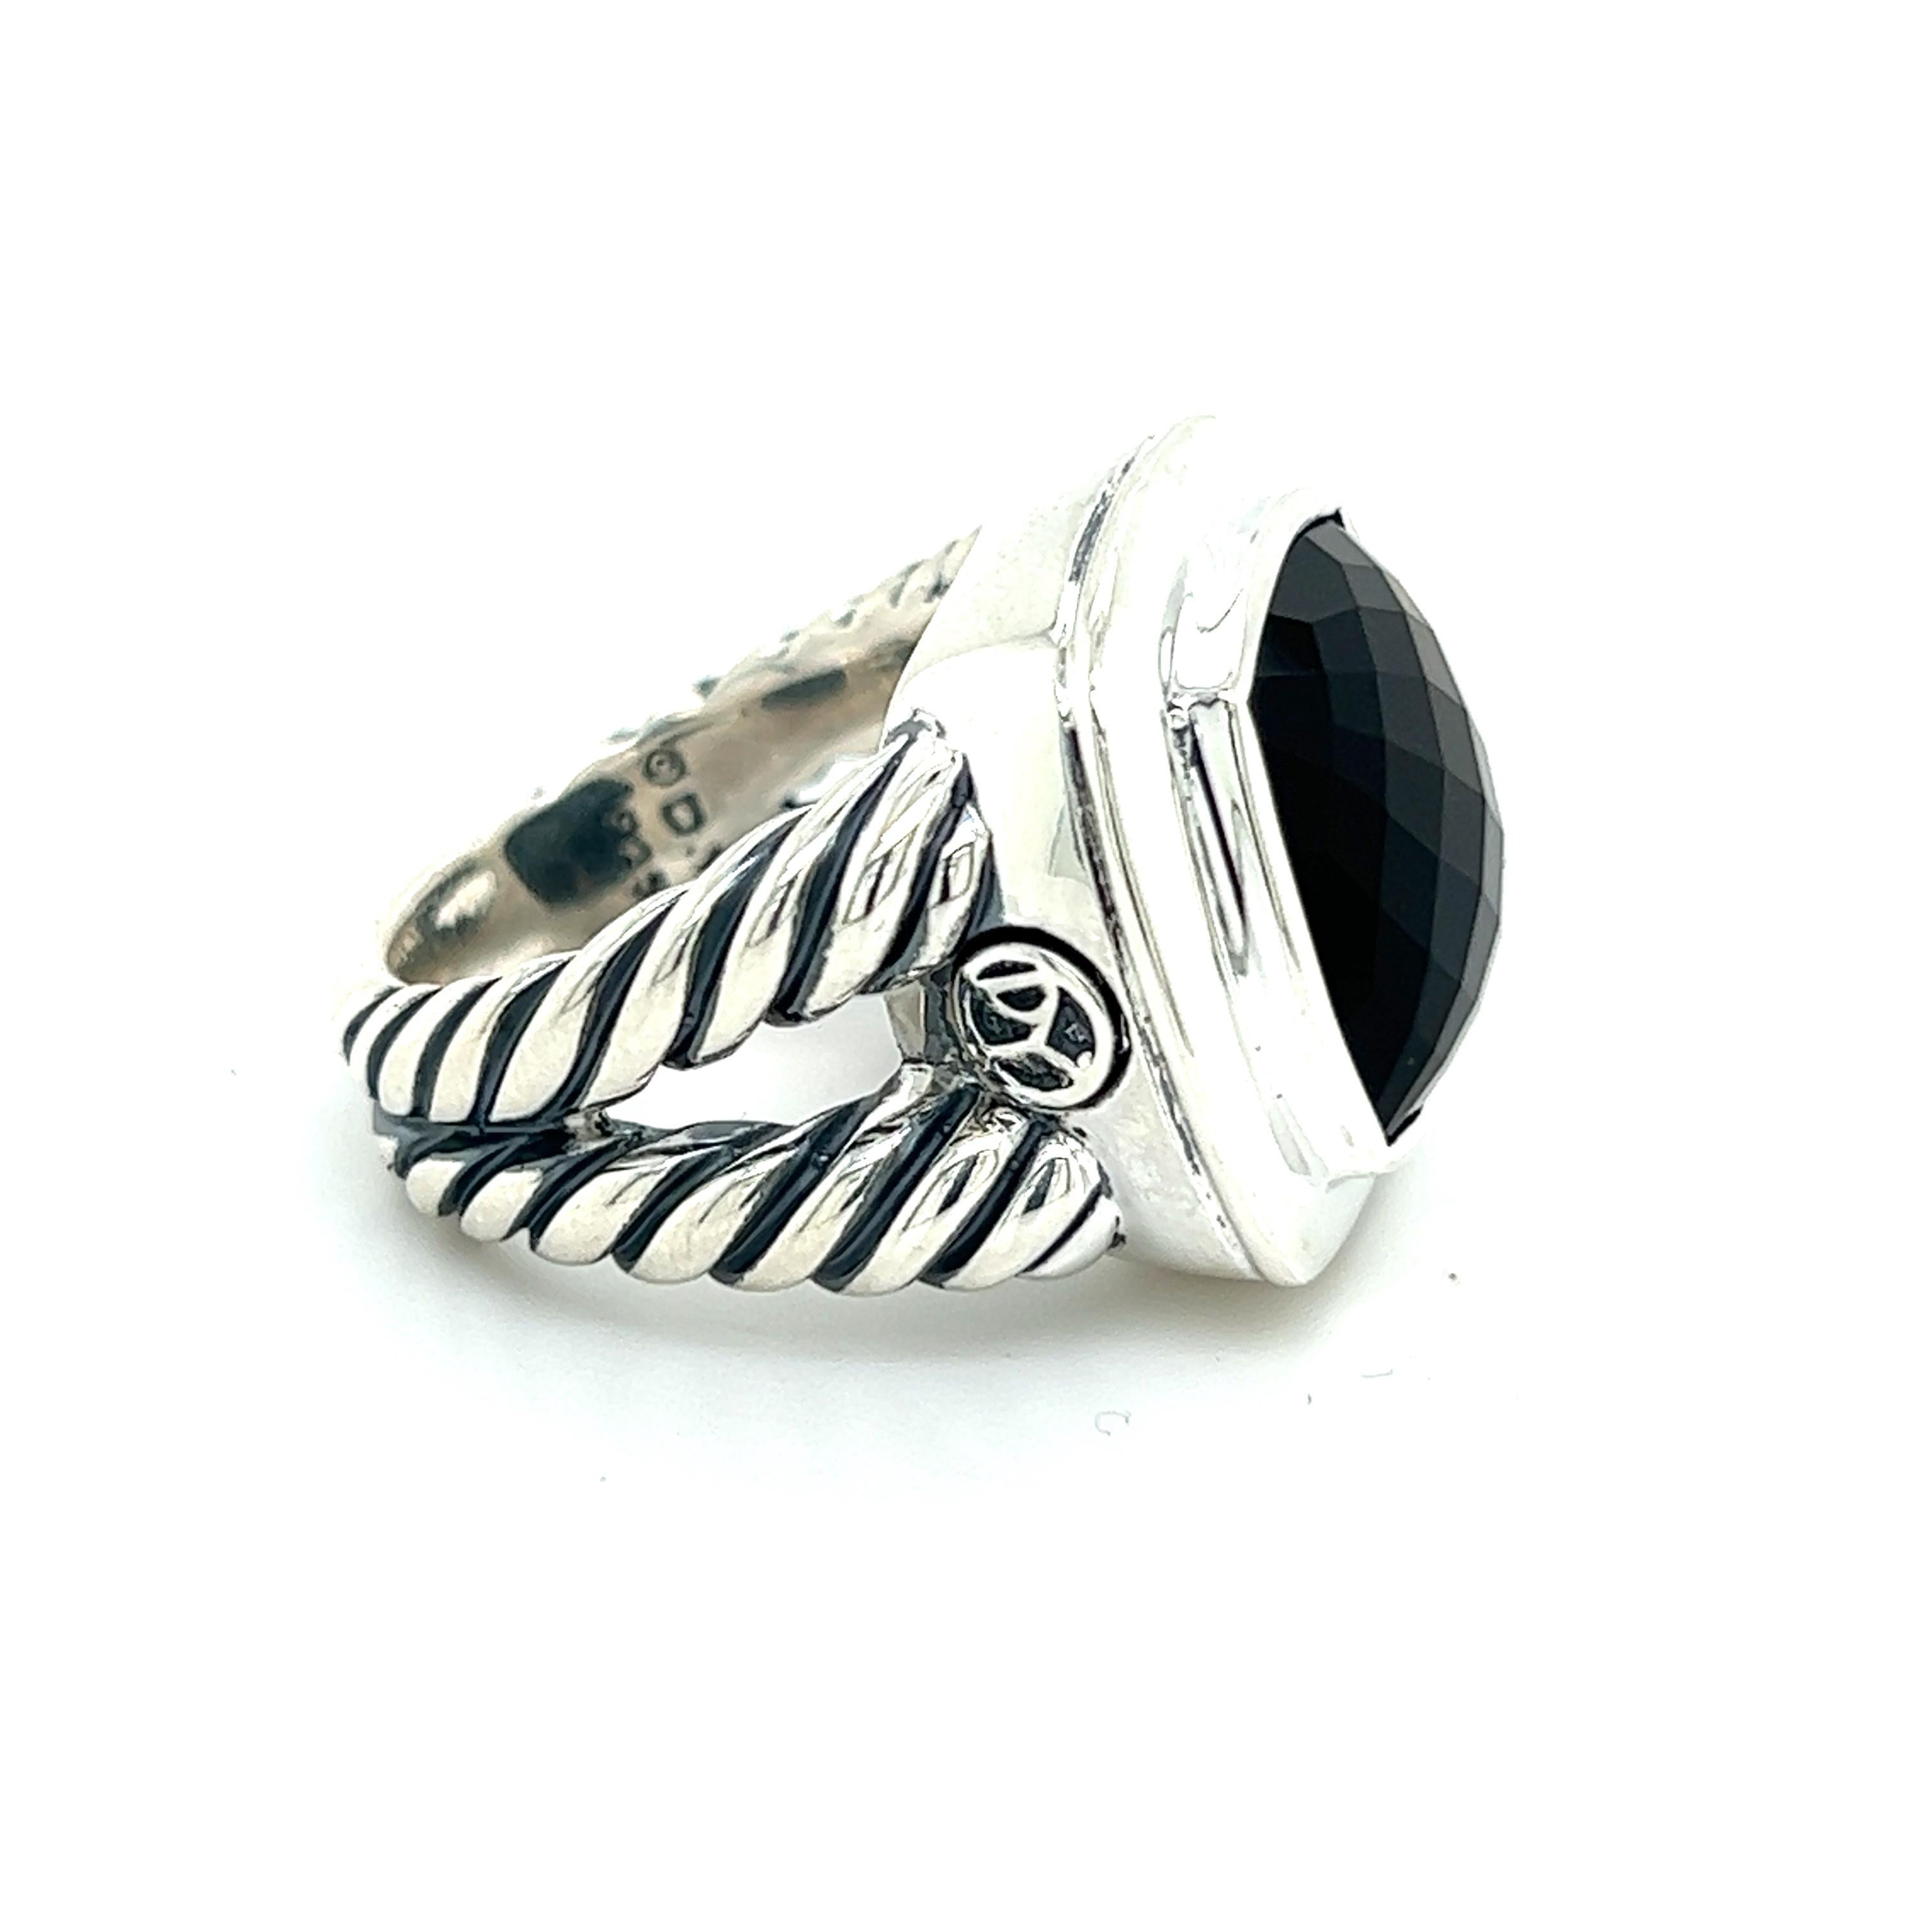 Authentic David Yurman Estate Black Onyx Albion Ring 5.75 Silver DY248

Retail: $790

Ring from ALBION COLLECTION

This elegant Authentic David Yurman ring is made of sterling silver.

TRUSTED SELLER SINCE 2002

PLEASE SEE OUR HUNDREDS OF POSITIVE